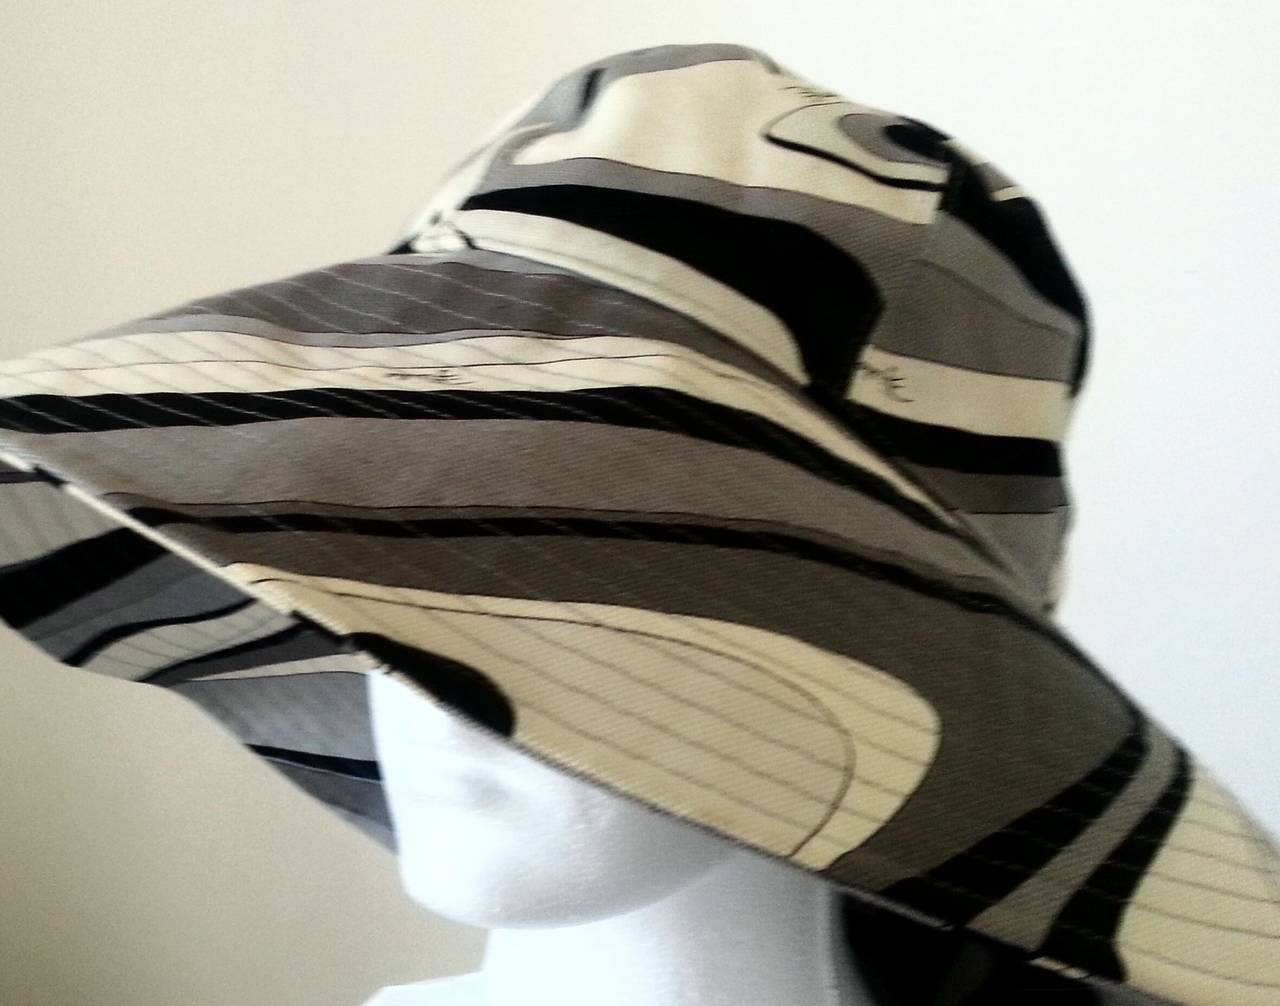 Emilio Pucci wide brim hat from the late 60s or early 70s. 

The print is classic Pucci, in monochrome black, white and grey. A very chic hat that can be worn as a sun hat or something altogether dressier with a smart blouse and trousers or a